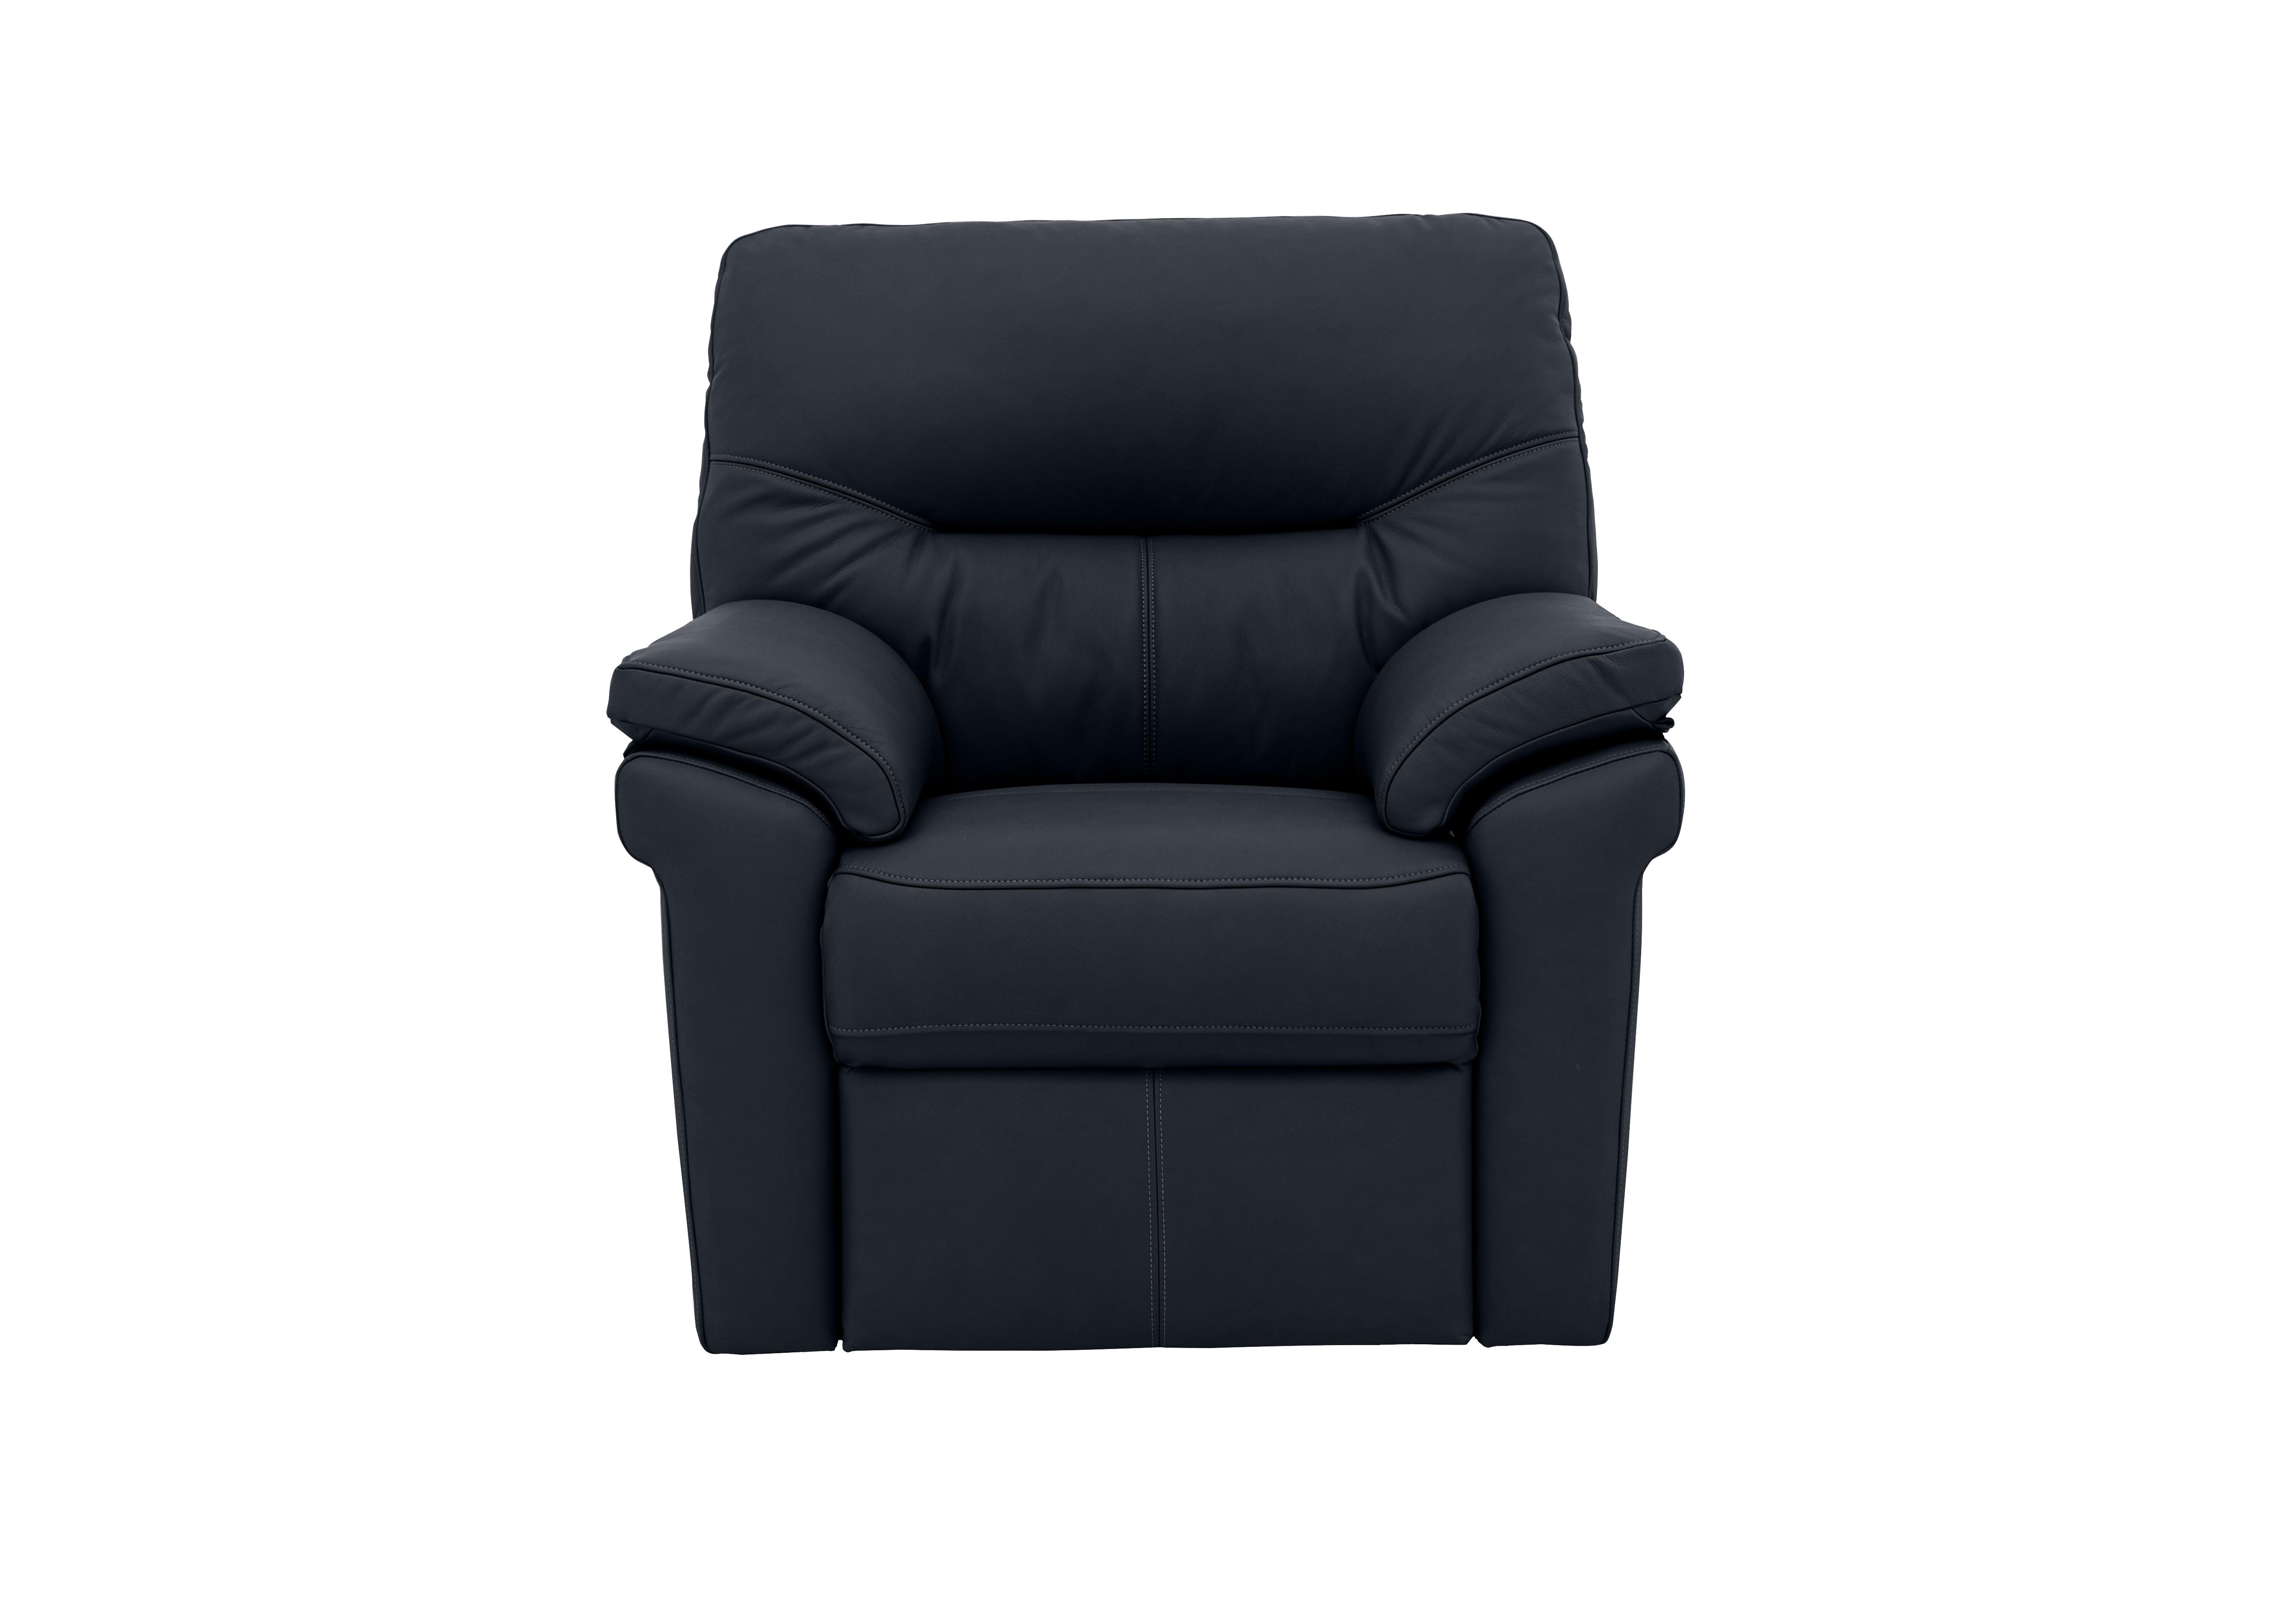 Seattle Leather Armchair in L851 Cambridge Navy on Furniture Village